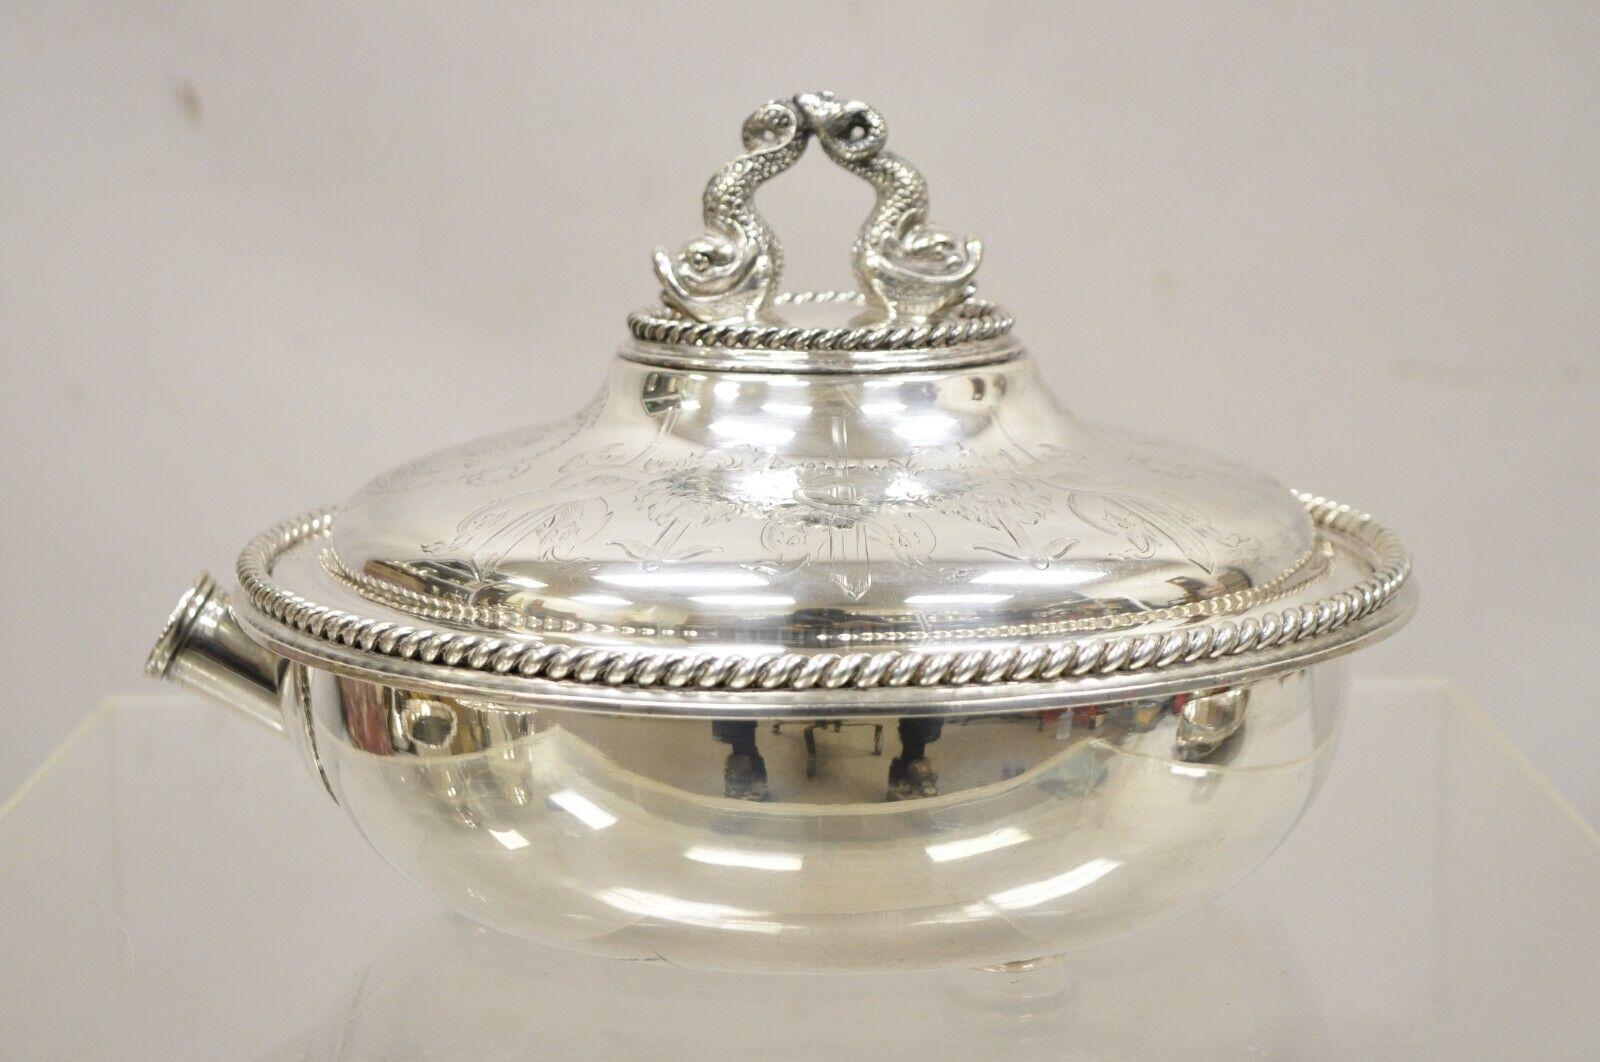 Antique English Victorian Figural Dolphin & Lion Crest Warming Tureen Serving Lidded Dish. Item features a lidded spout for adding hot water to keep the dish warm. Water settles in a separate section in the bottom of the dish. Figural twin dolphin